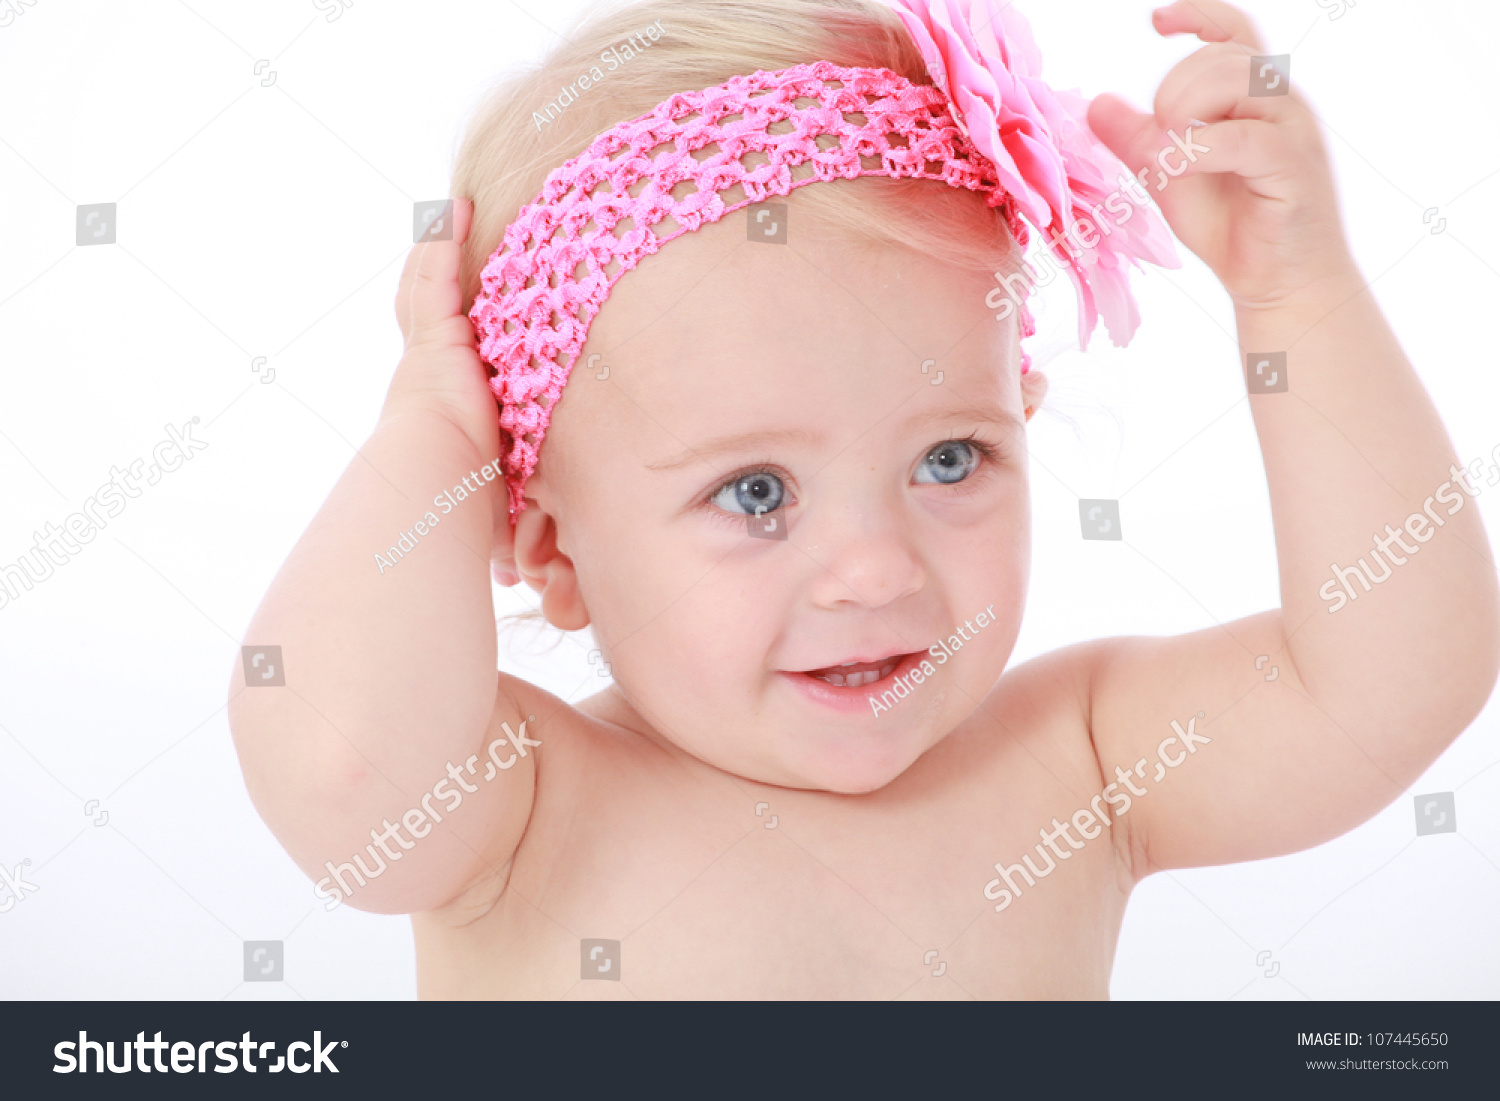 Cute Adorable Baby Girl Toddler Blond Stock Photo Edit Now 107445650